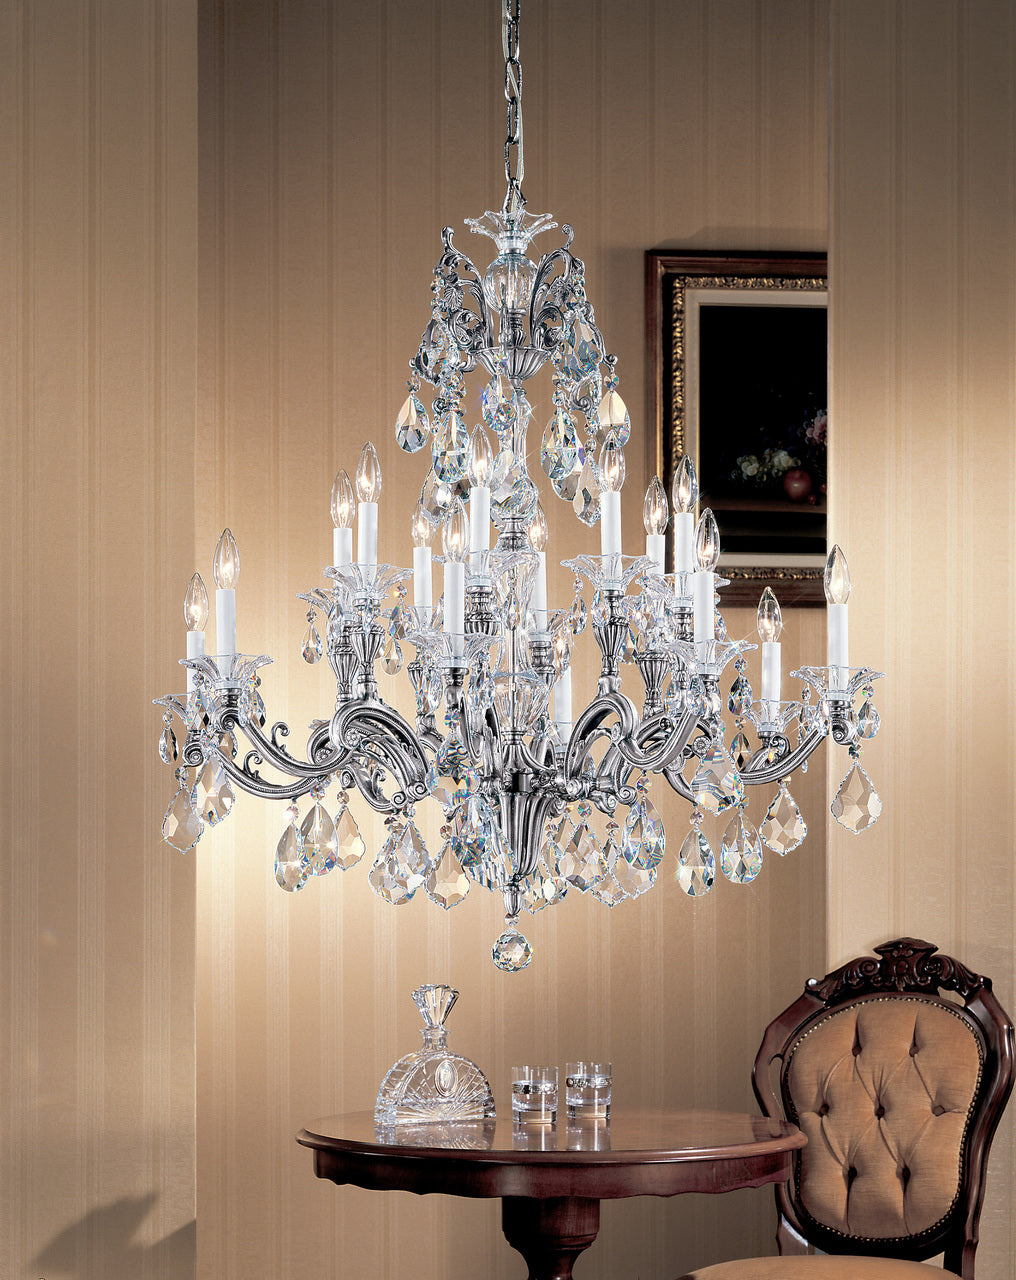 Classic Lighting 57116 RB SGT Via Firenze Crystal Chandelier in Roman Bronze (Imported from Spain)